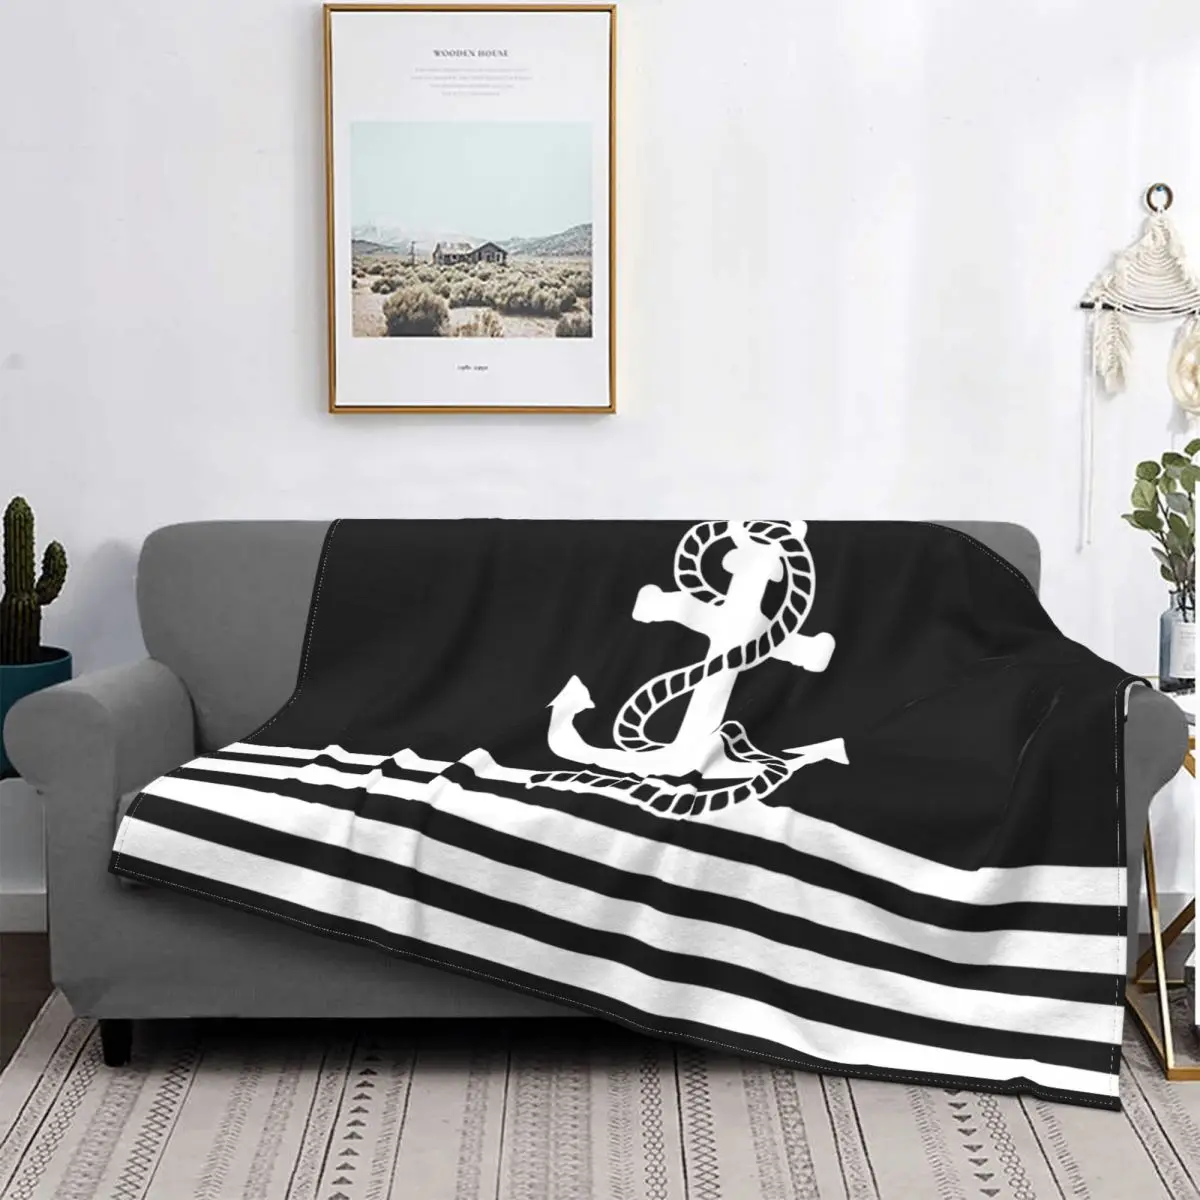 Nautical Black White Stripes And Black White Anchor Blankets Fleece Winter Lightweight Throw Blanket for Bed Car Bedspreads